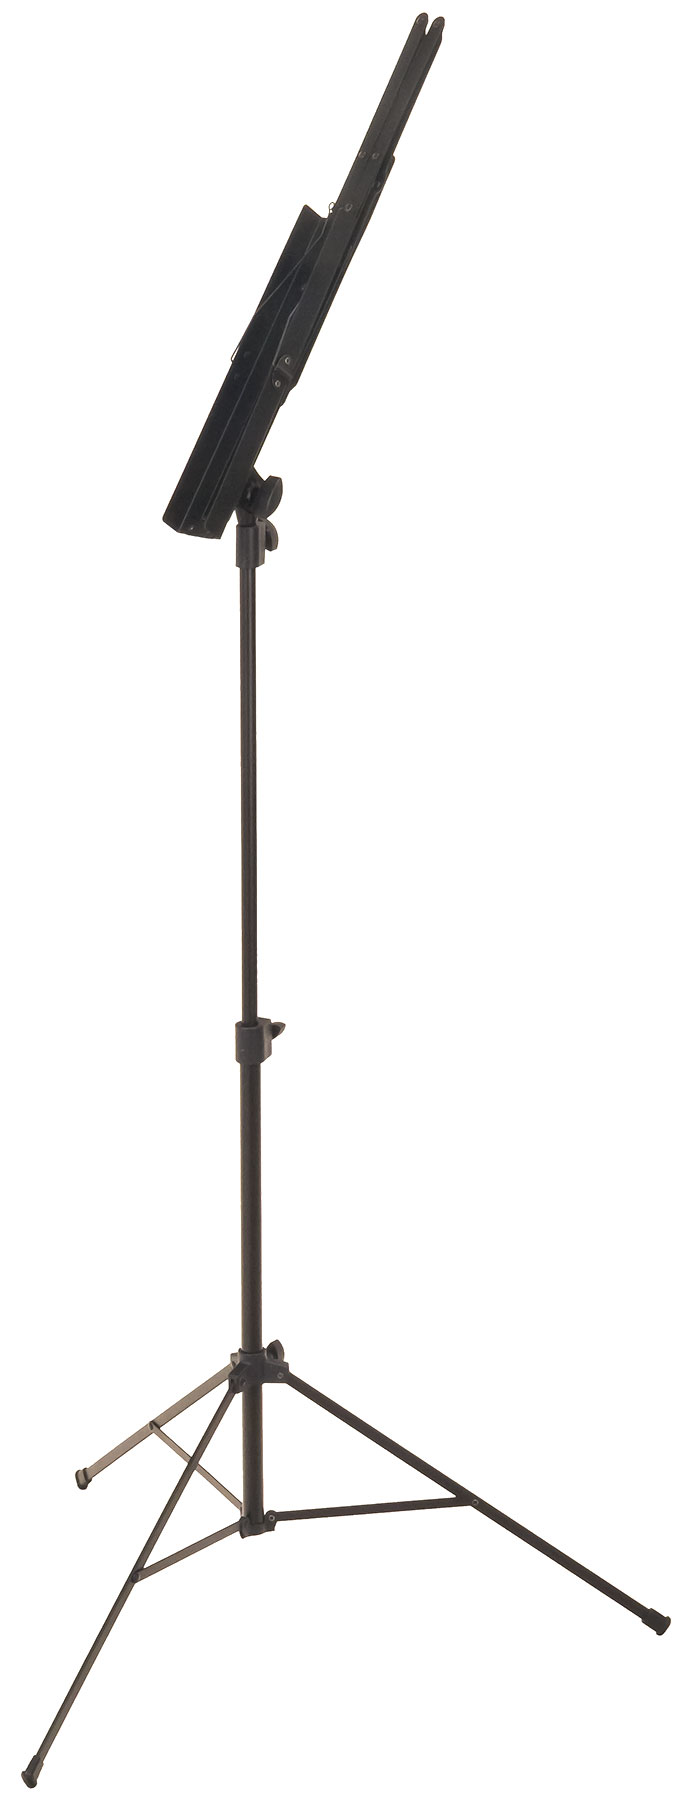 X-tone Xh 6500 Pupitre Pliable - Music stand - Variation 2